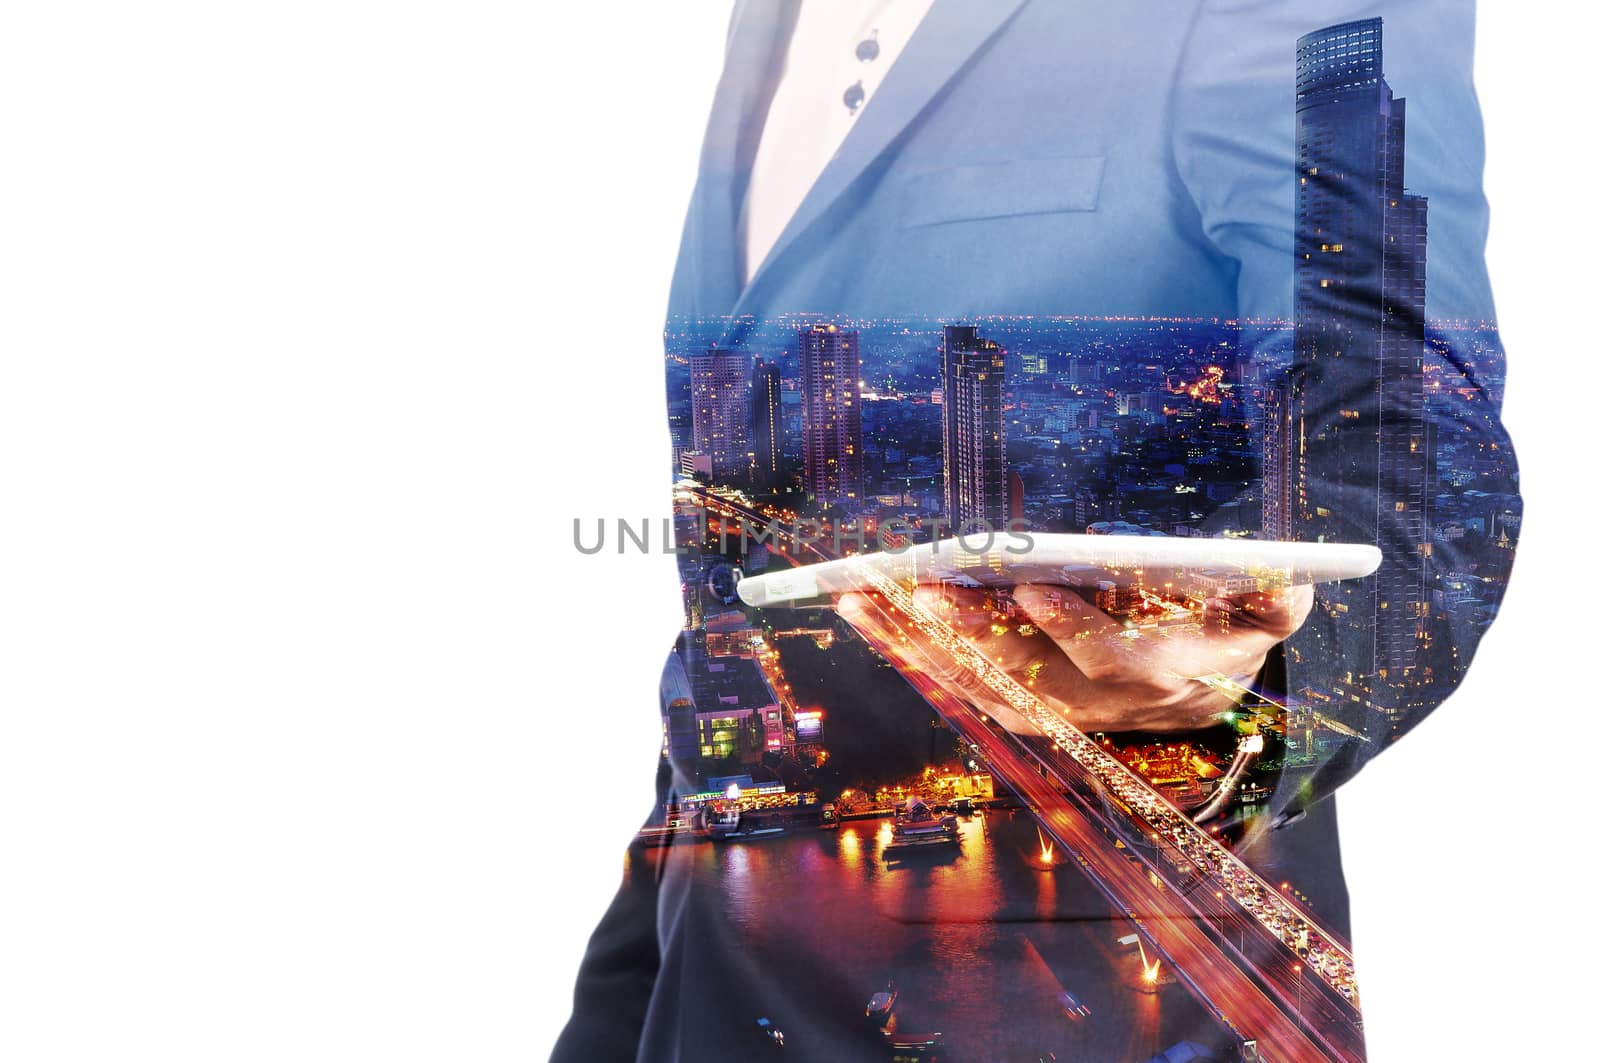 Double Exposure image of Businessman use Digital Tablet and City Building at Twilight as Business Technology concept